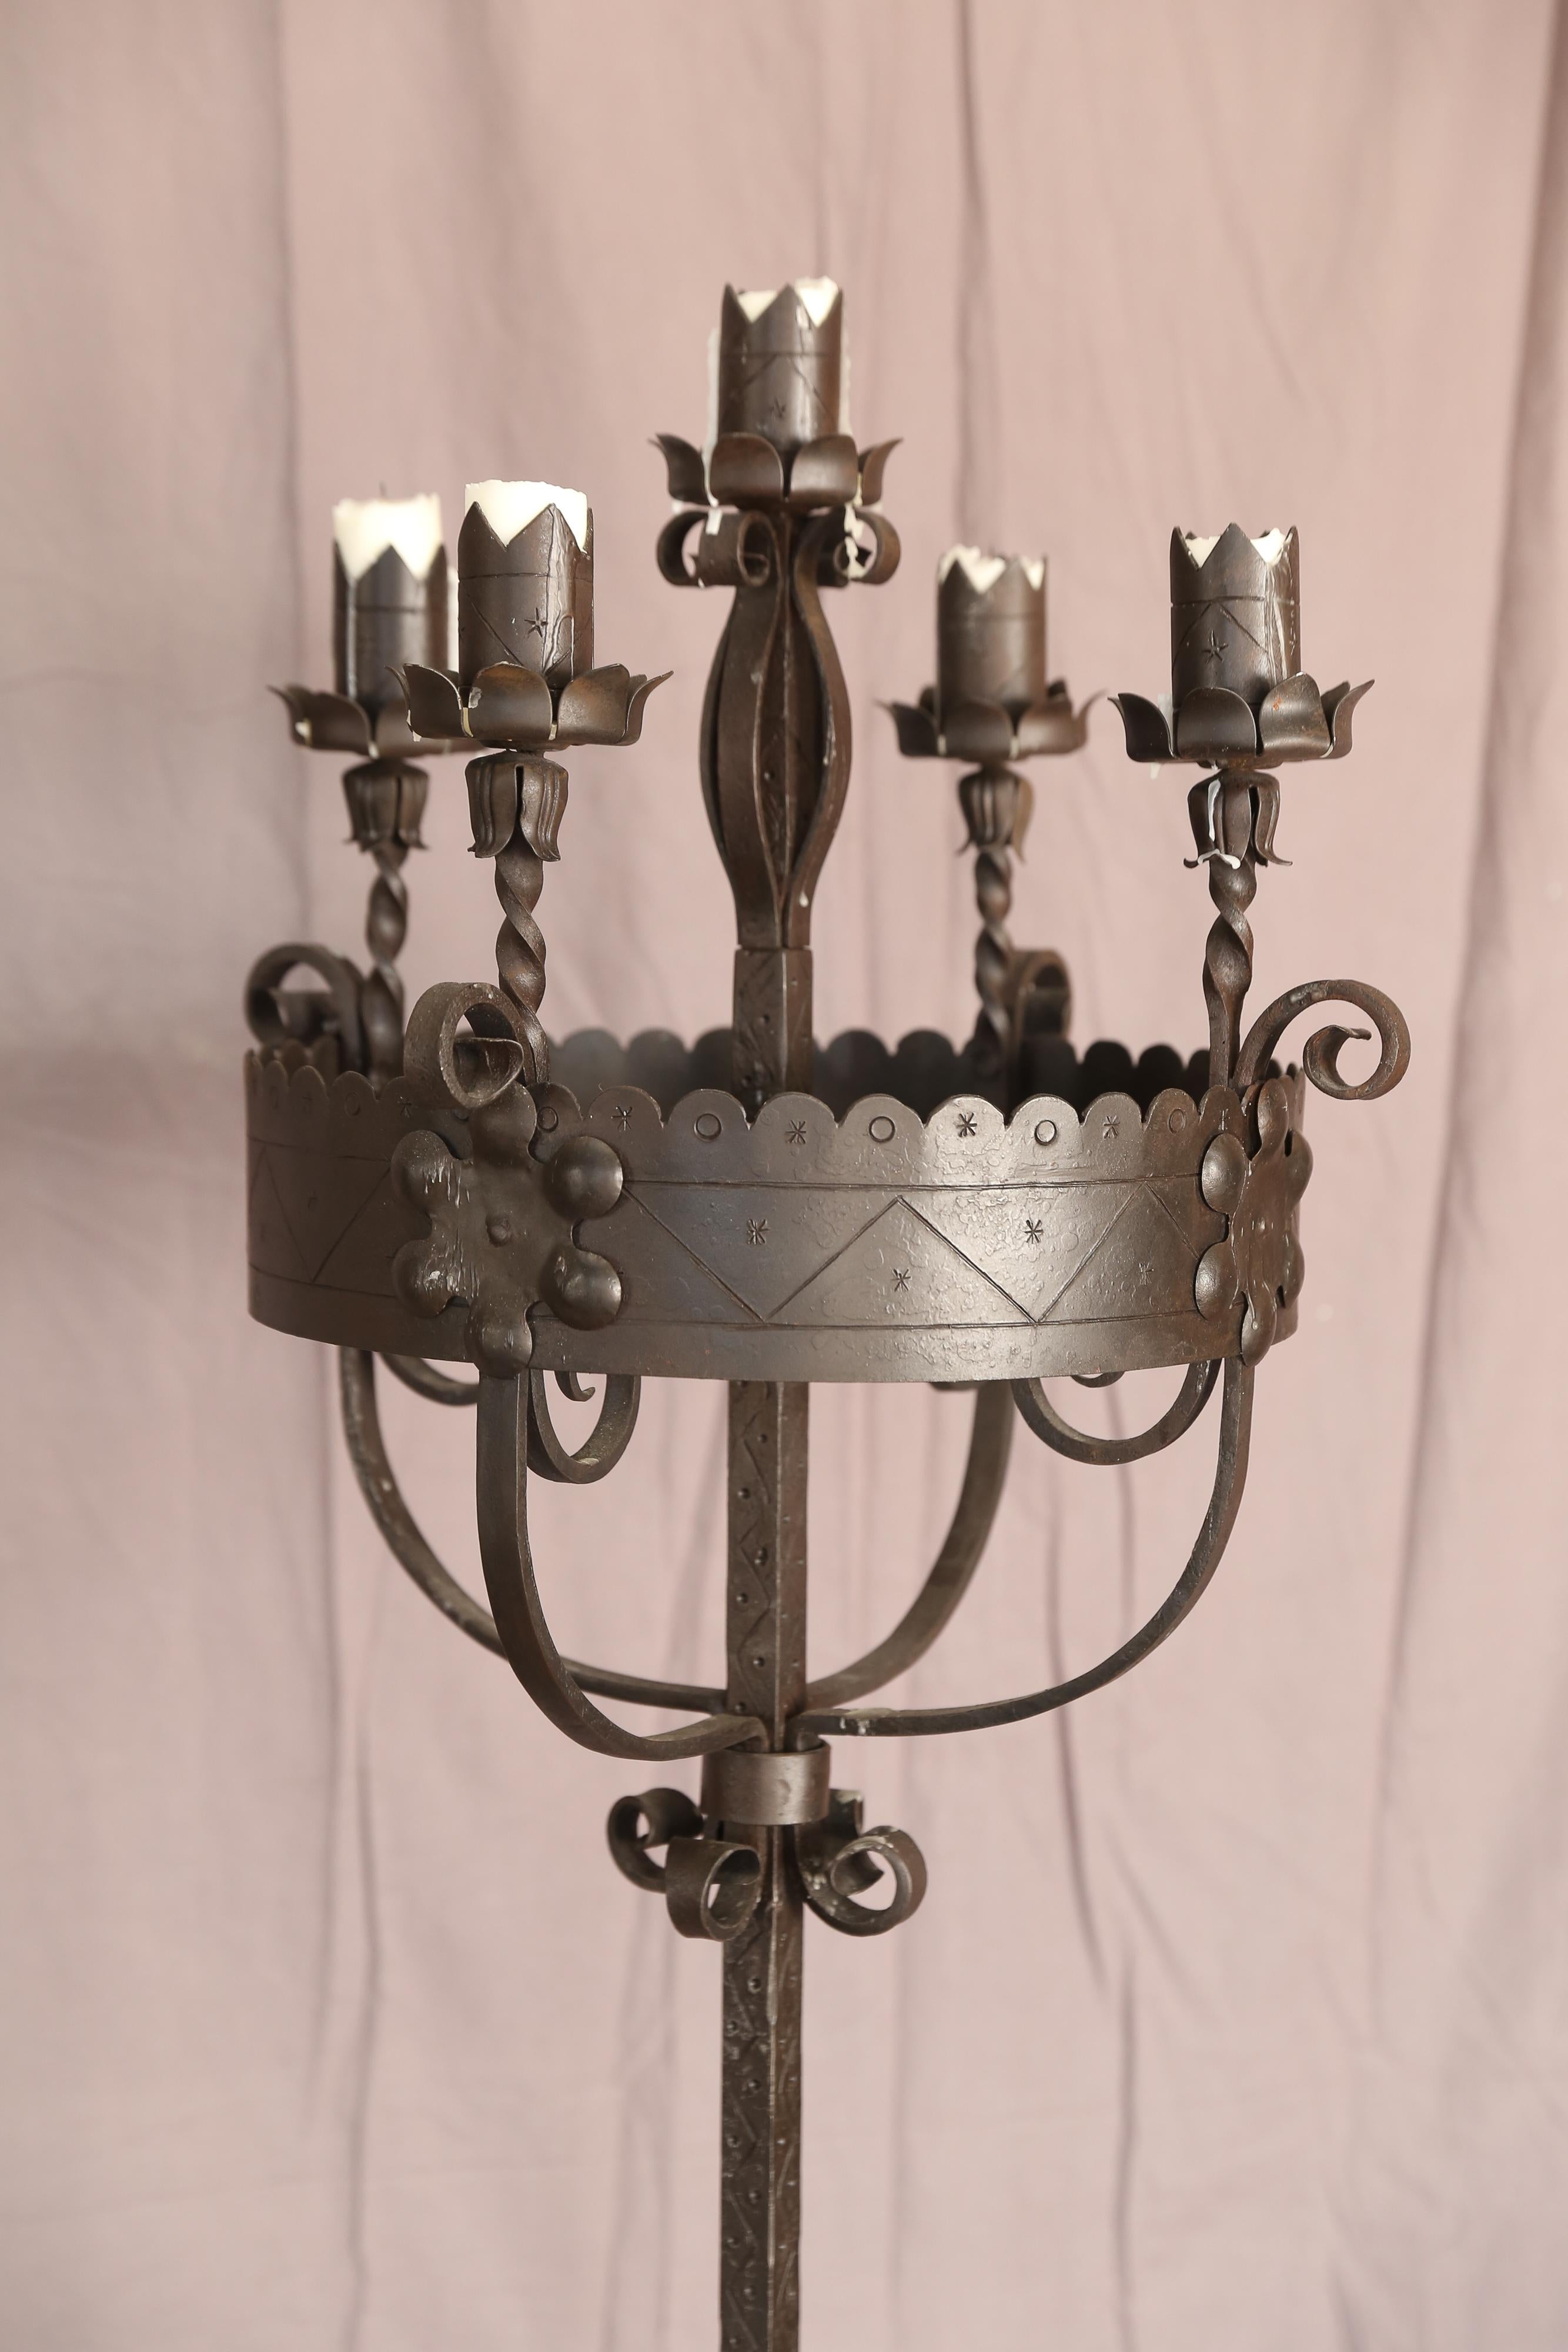 Replica of a 19th century French iron candlestick.